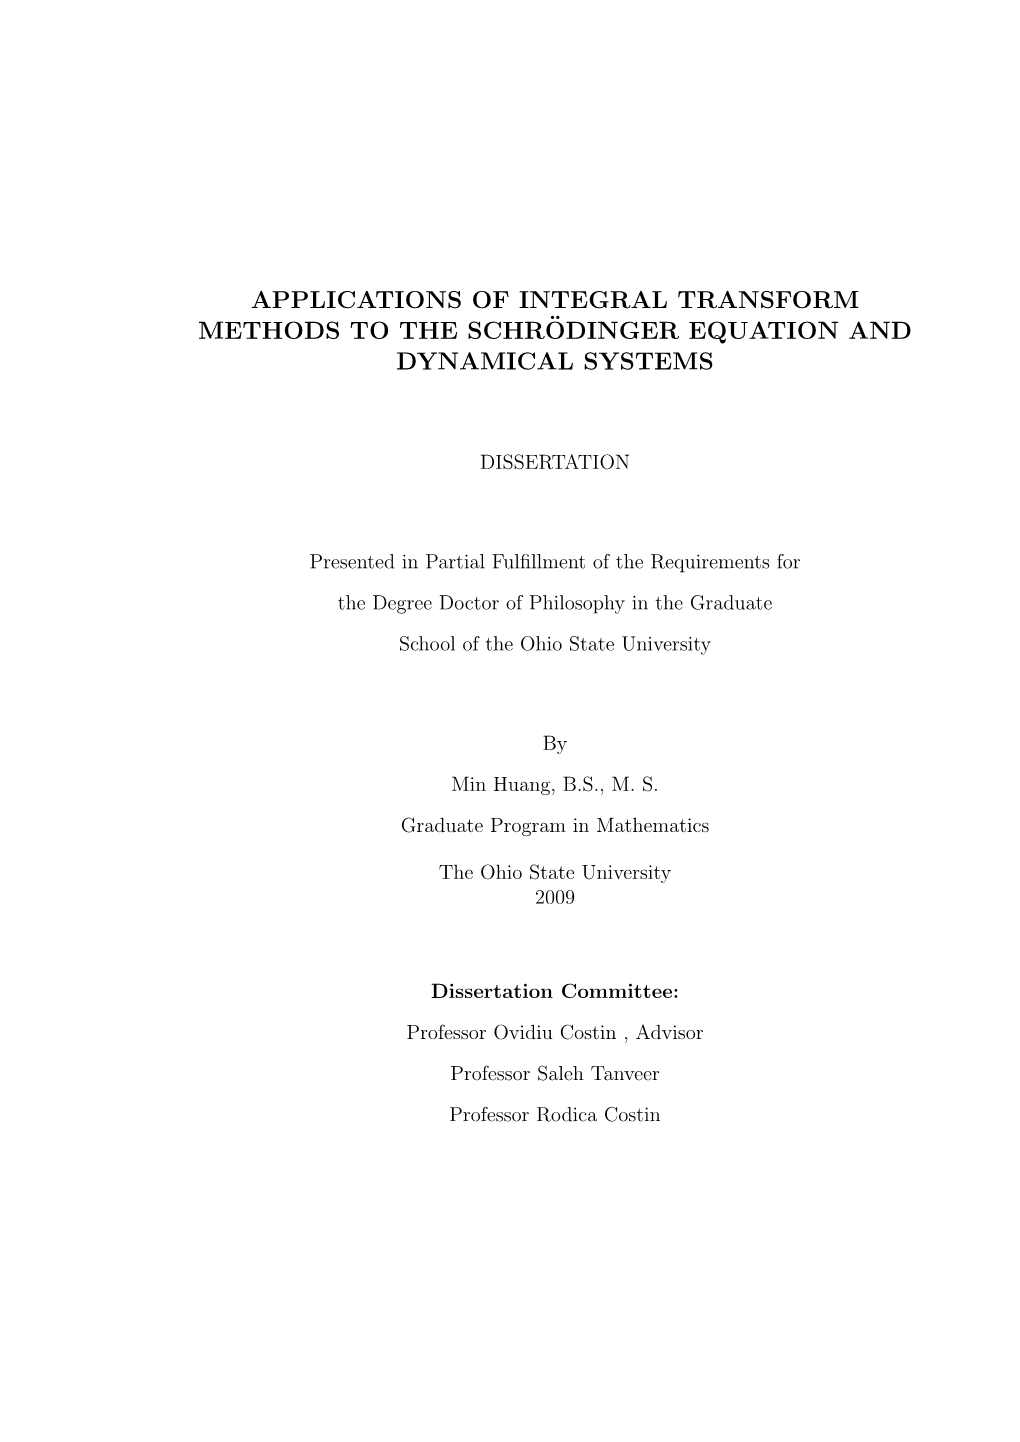 Applications of Integral Transform Methods to the Schrodinger¨ Equation and Dynamical Systems